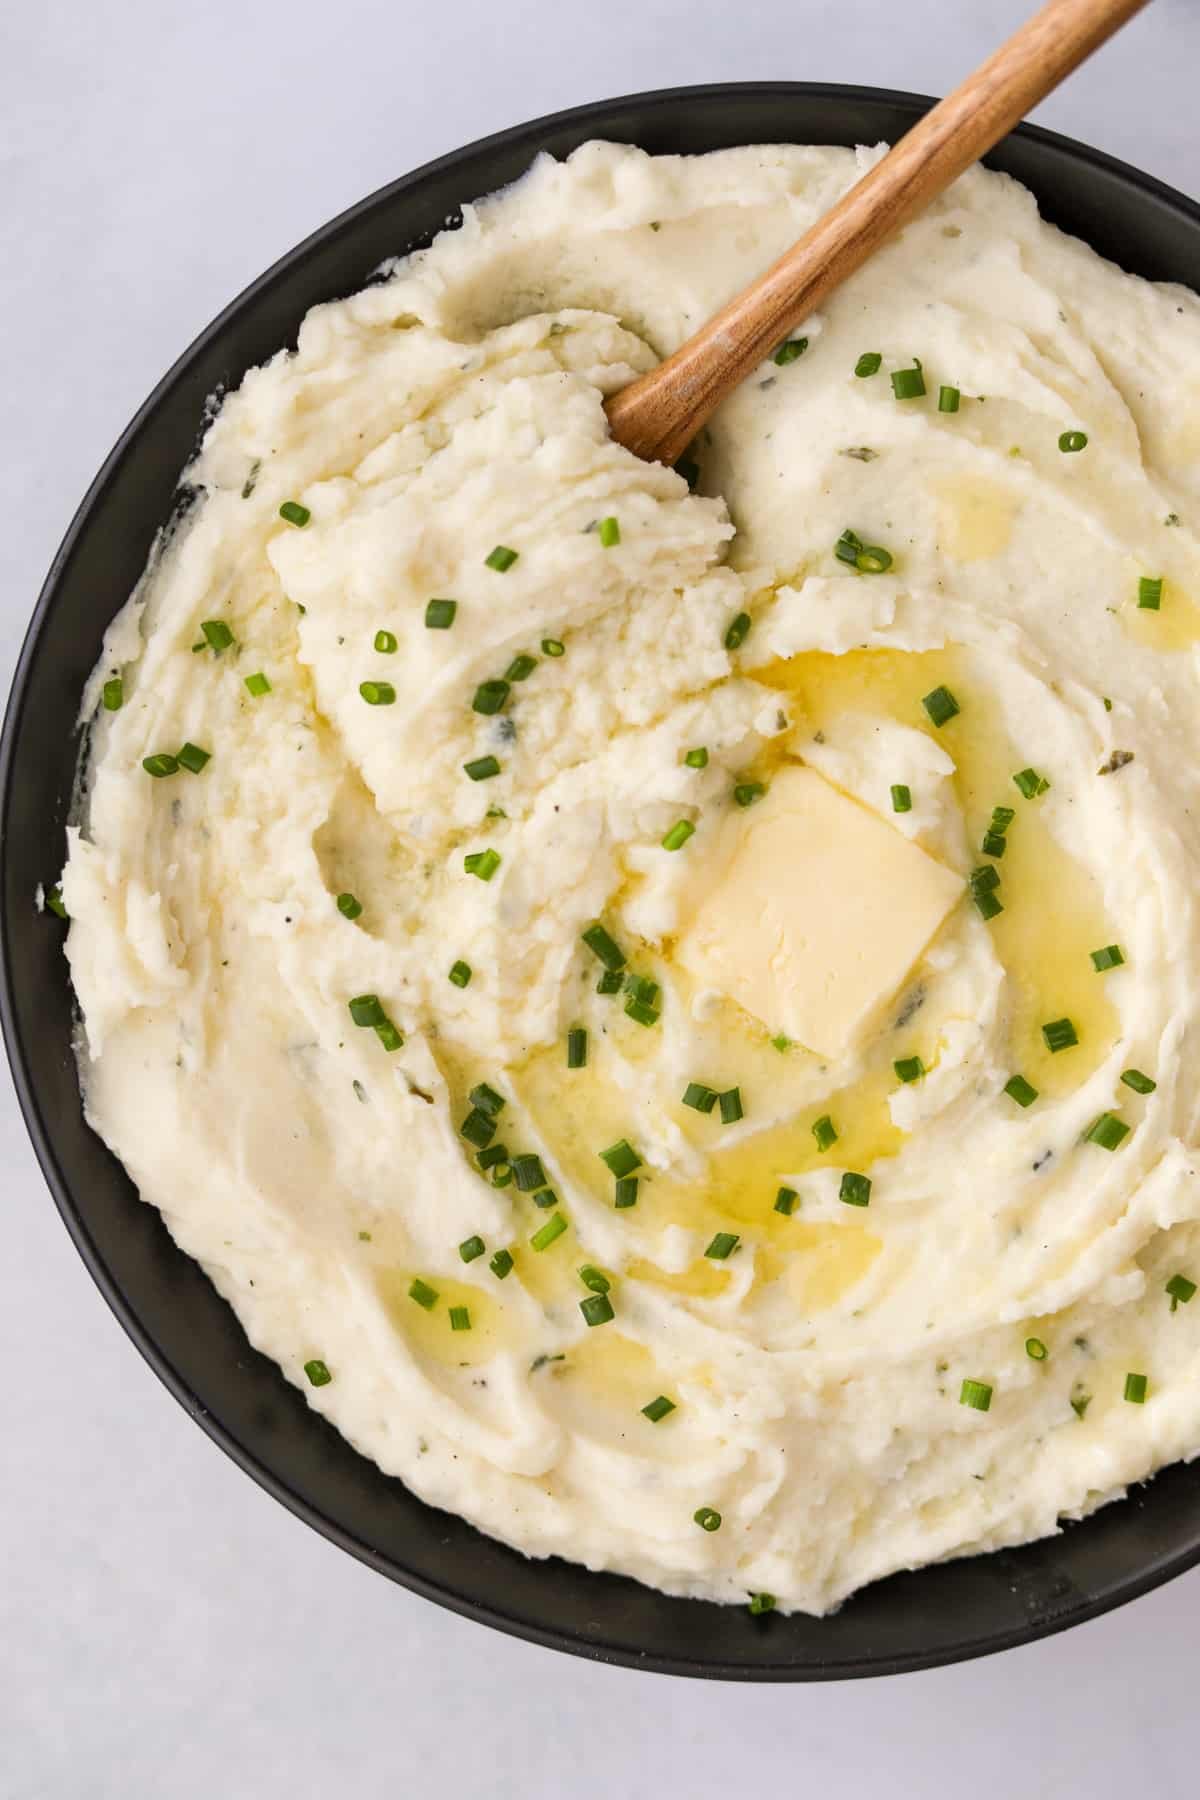 A black bowl filled with mashed potatoes and topped with melted butter and chives.